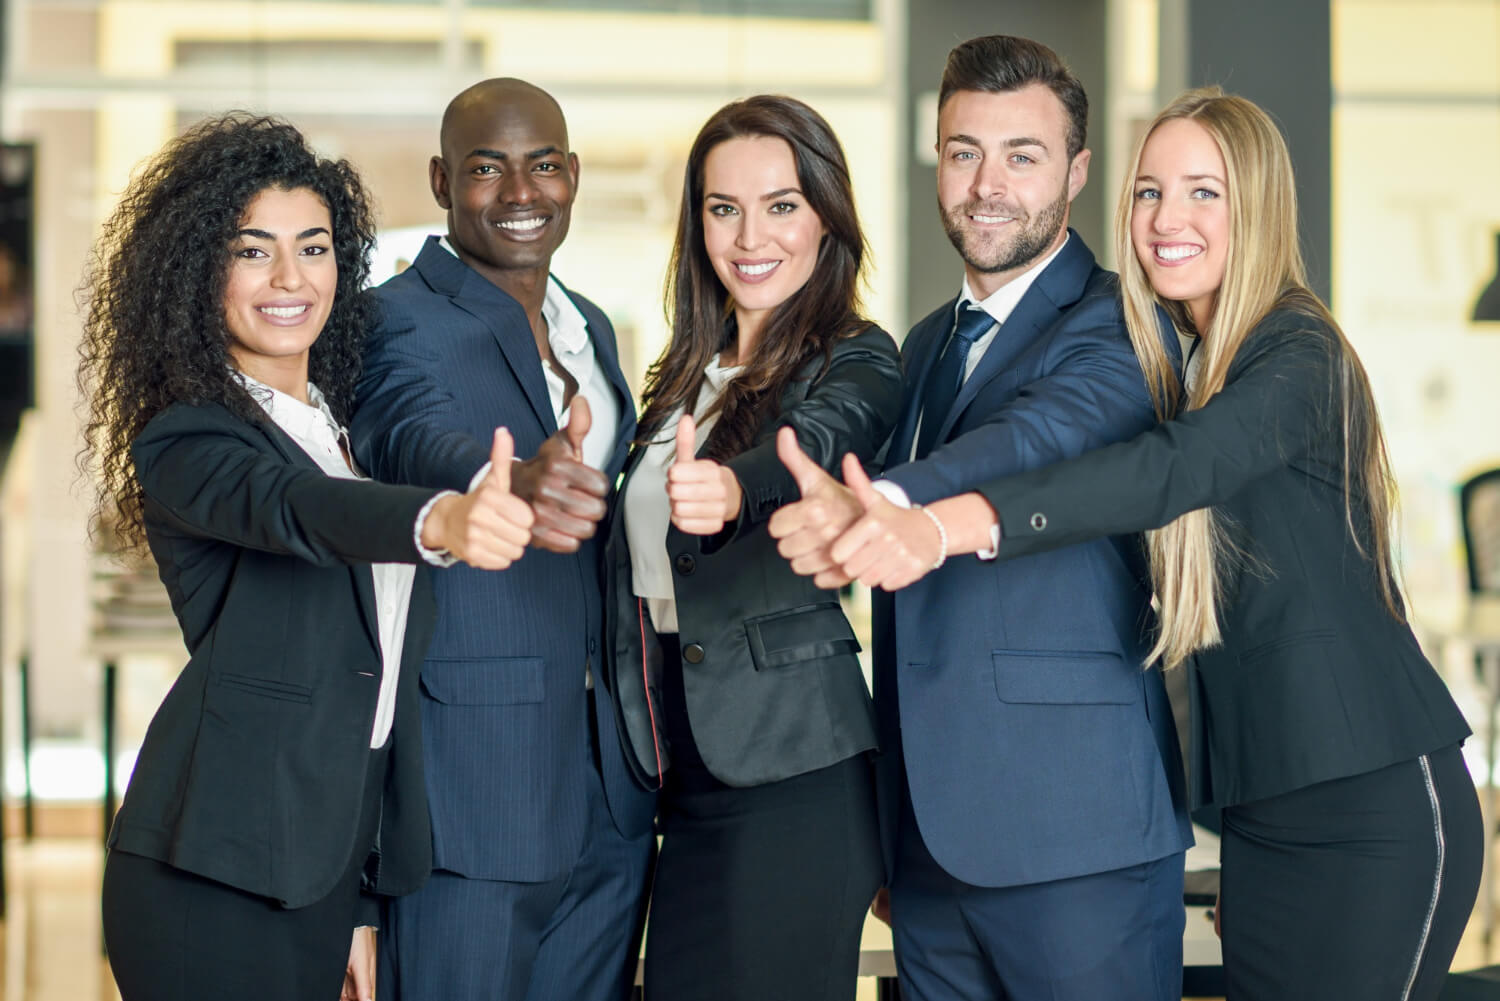 group-businesspeople-with-thumbs-up-gesture-modern-office-multi-ethnic-people-working-together-teamwork-concept (1)